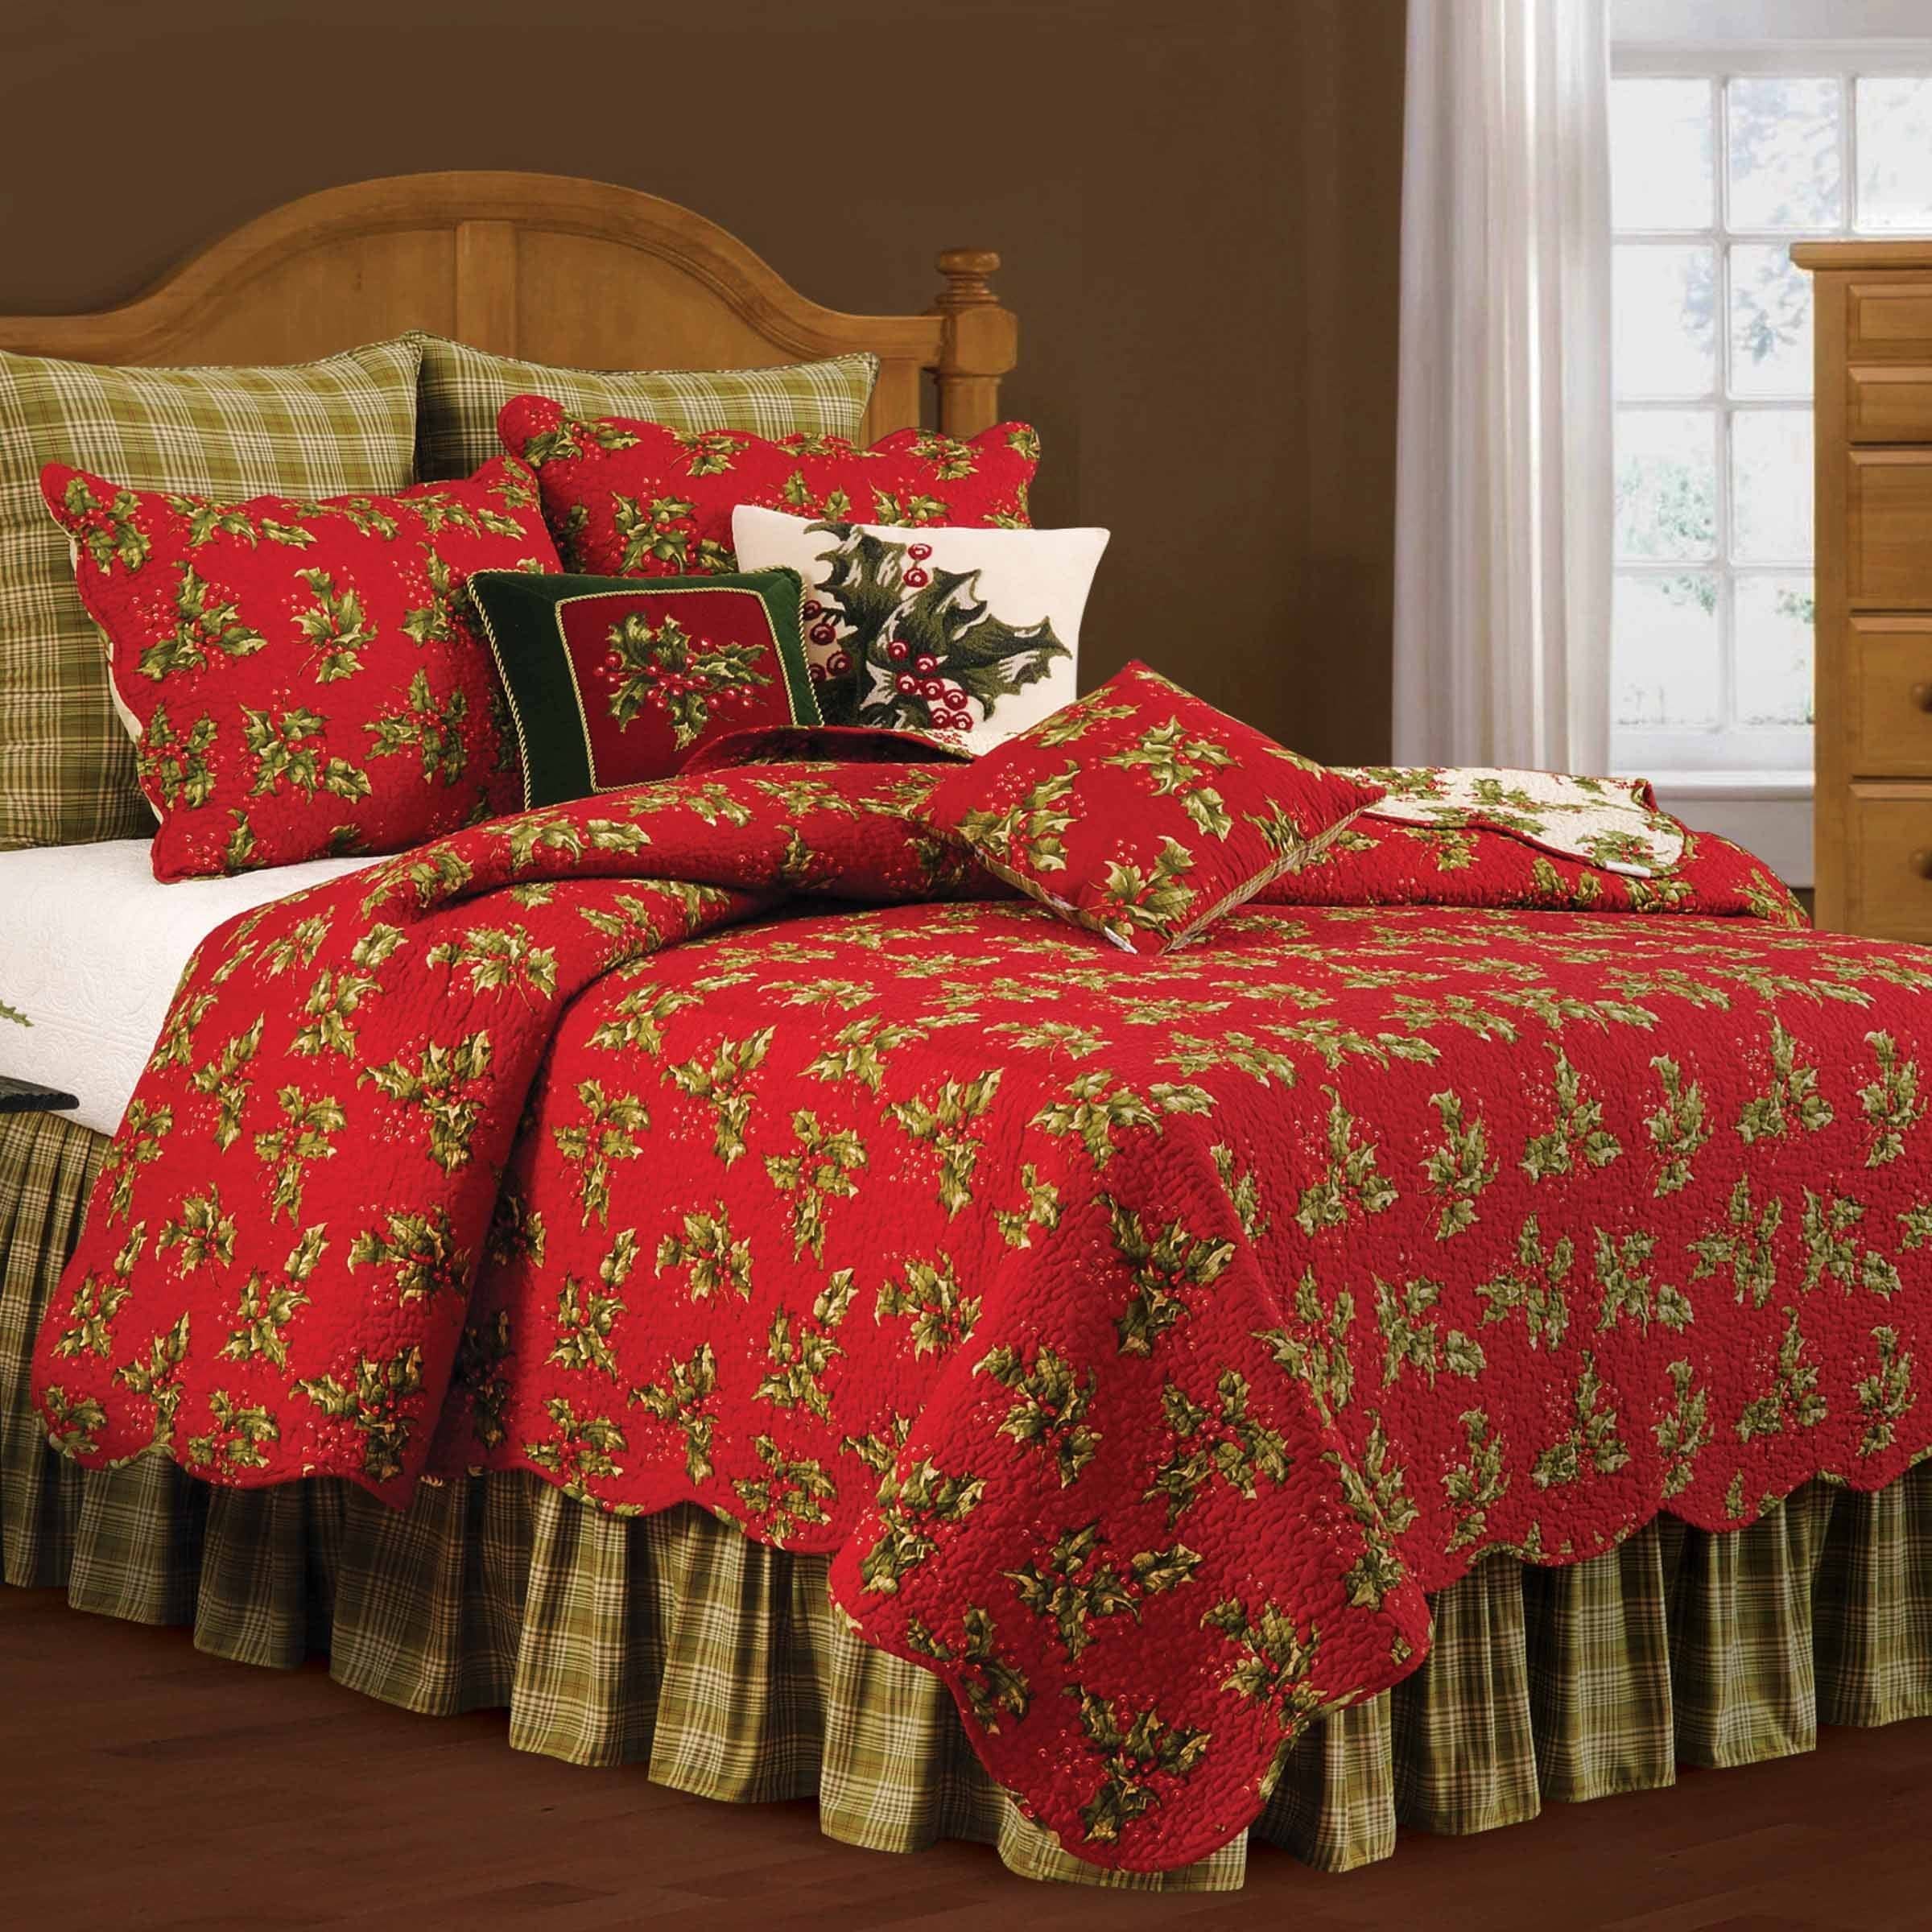 Shop Holly Red Cotton Quilt Shams Not Included Overstock